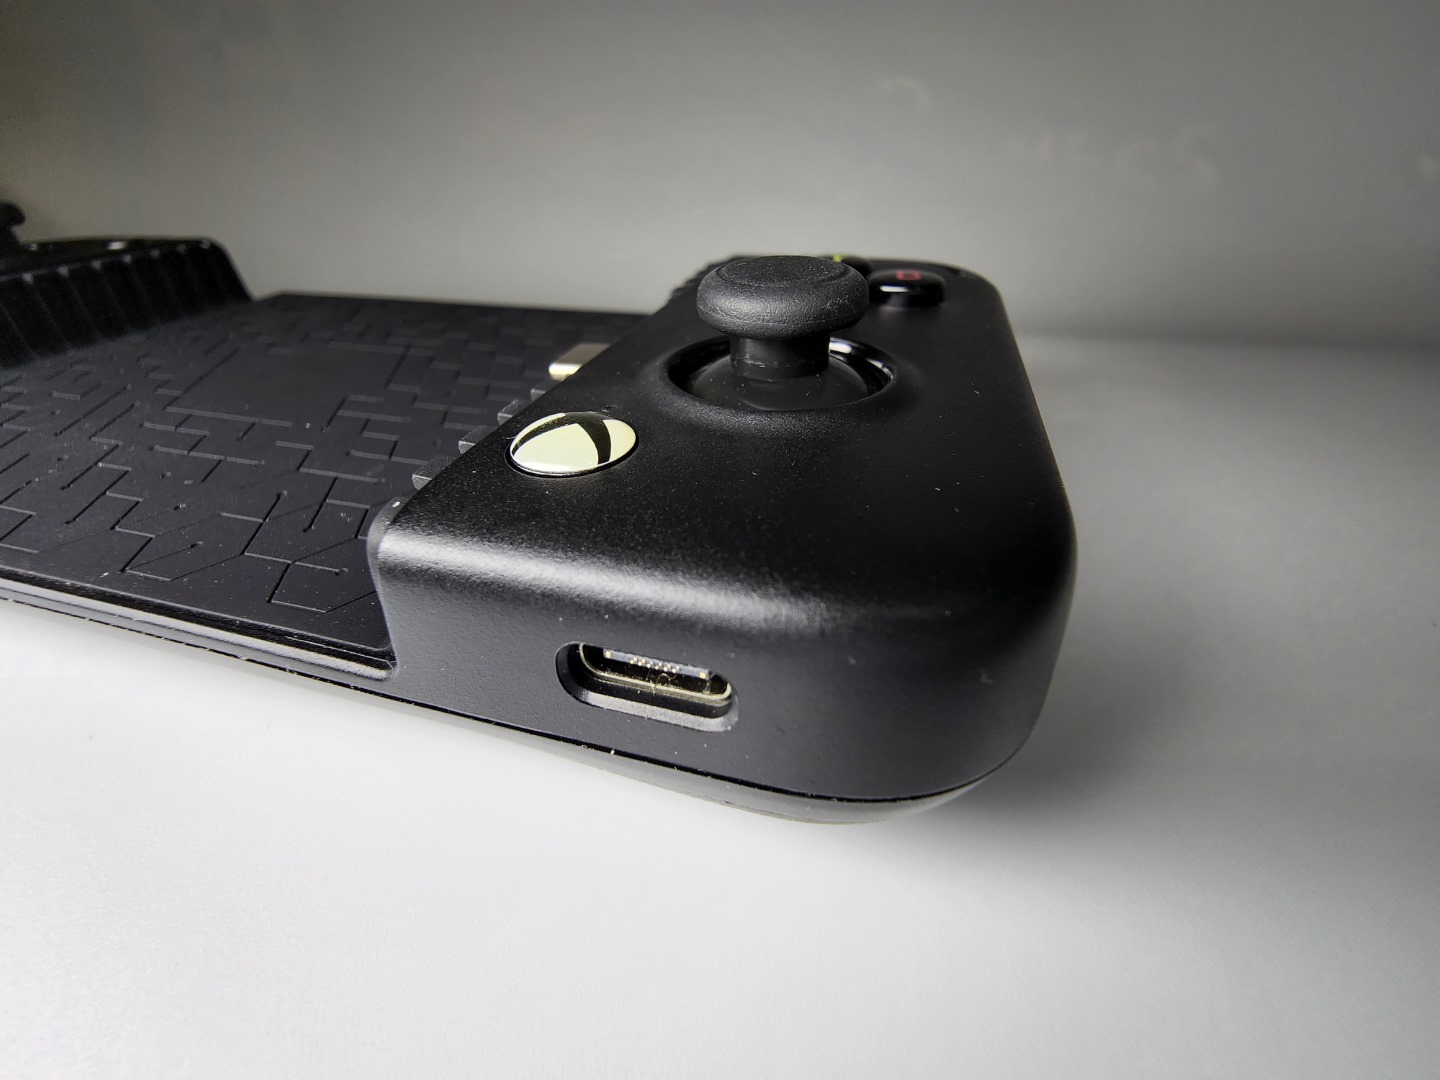 GameSir X2 Pro review: Xbox licensed and perfected